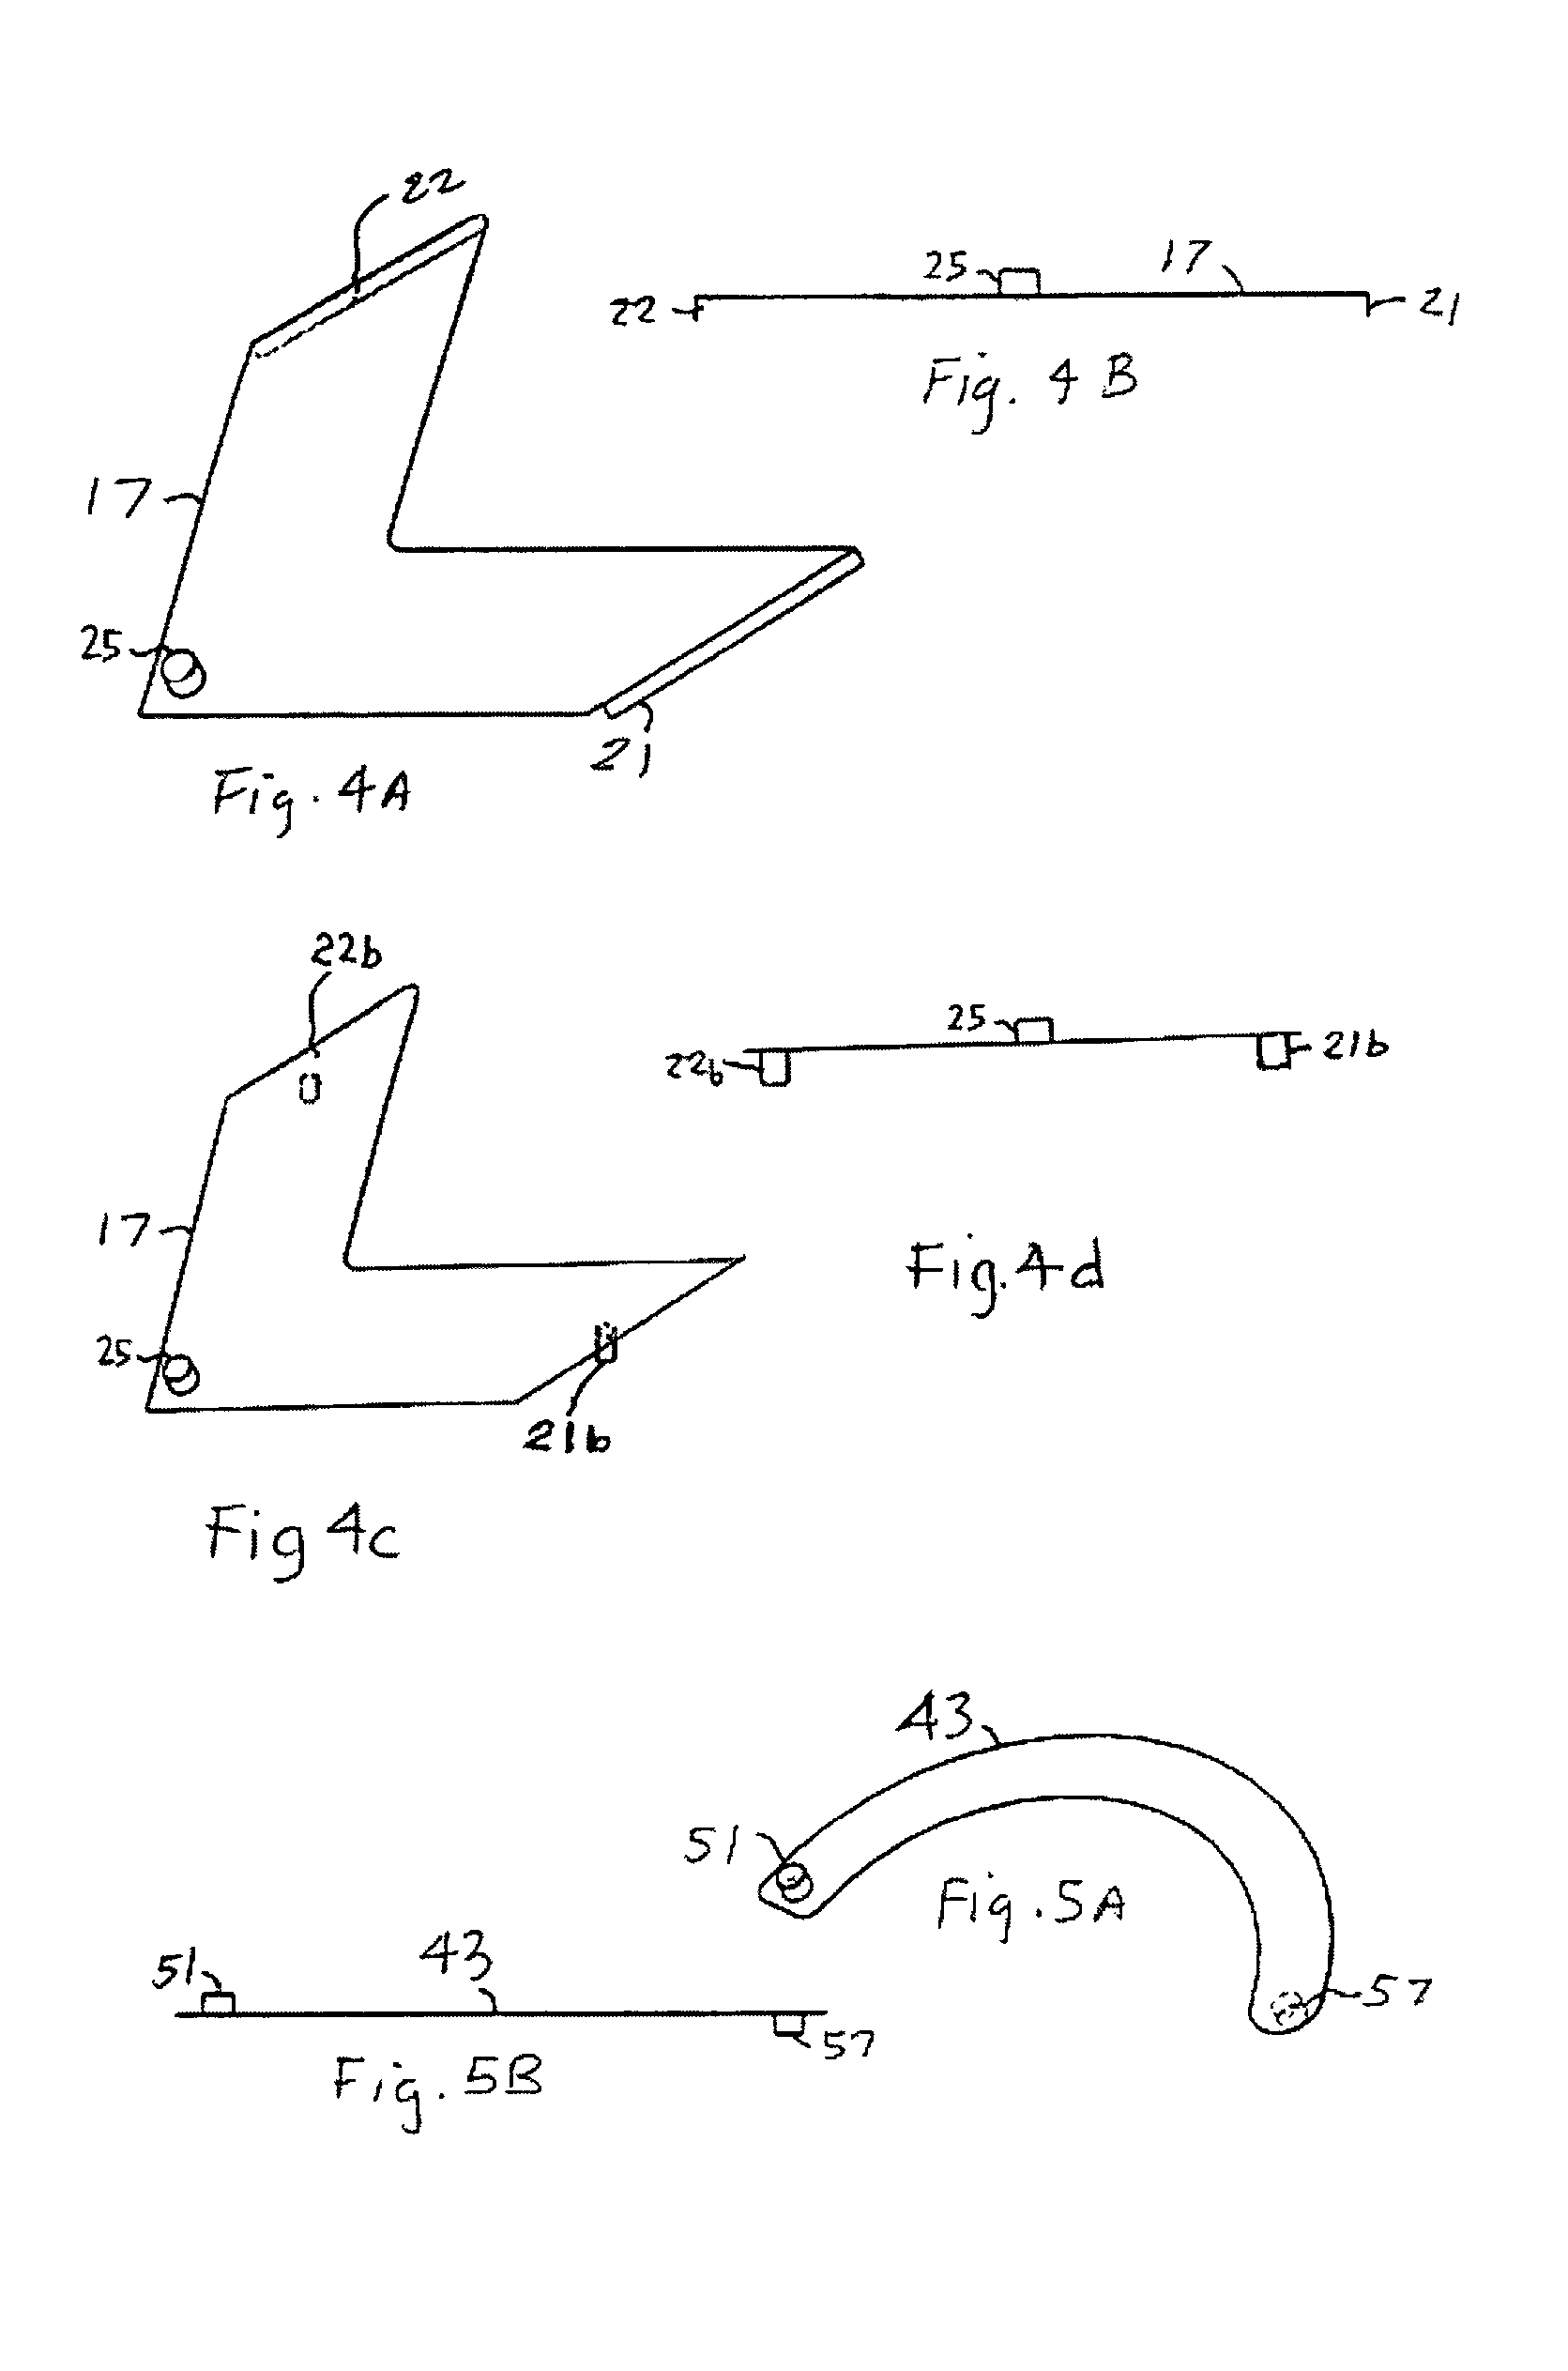 Non-circular continuous variable aperture or shutter for infrared cameras